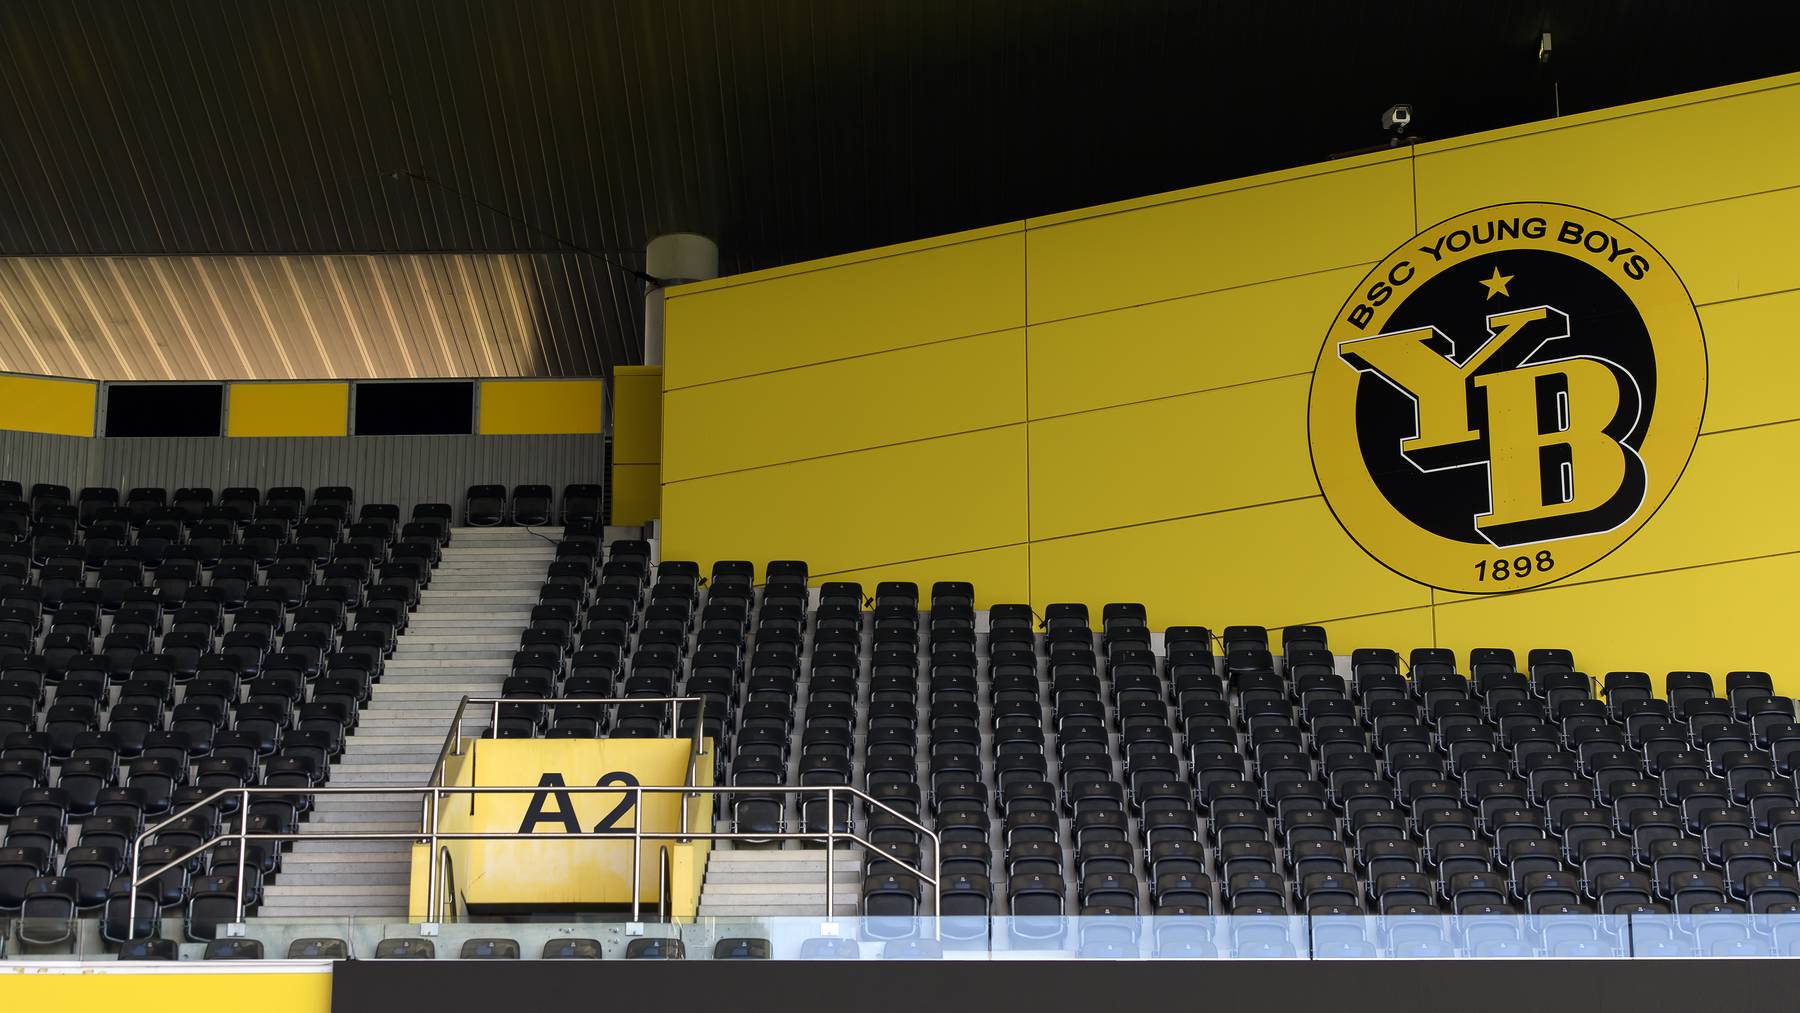 Stadion des BSC Young Boys